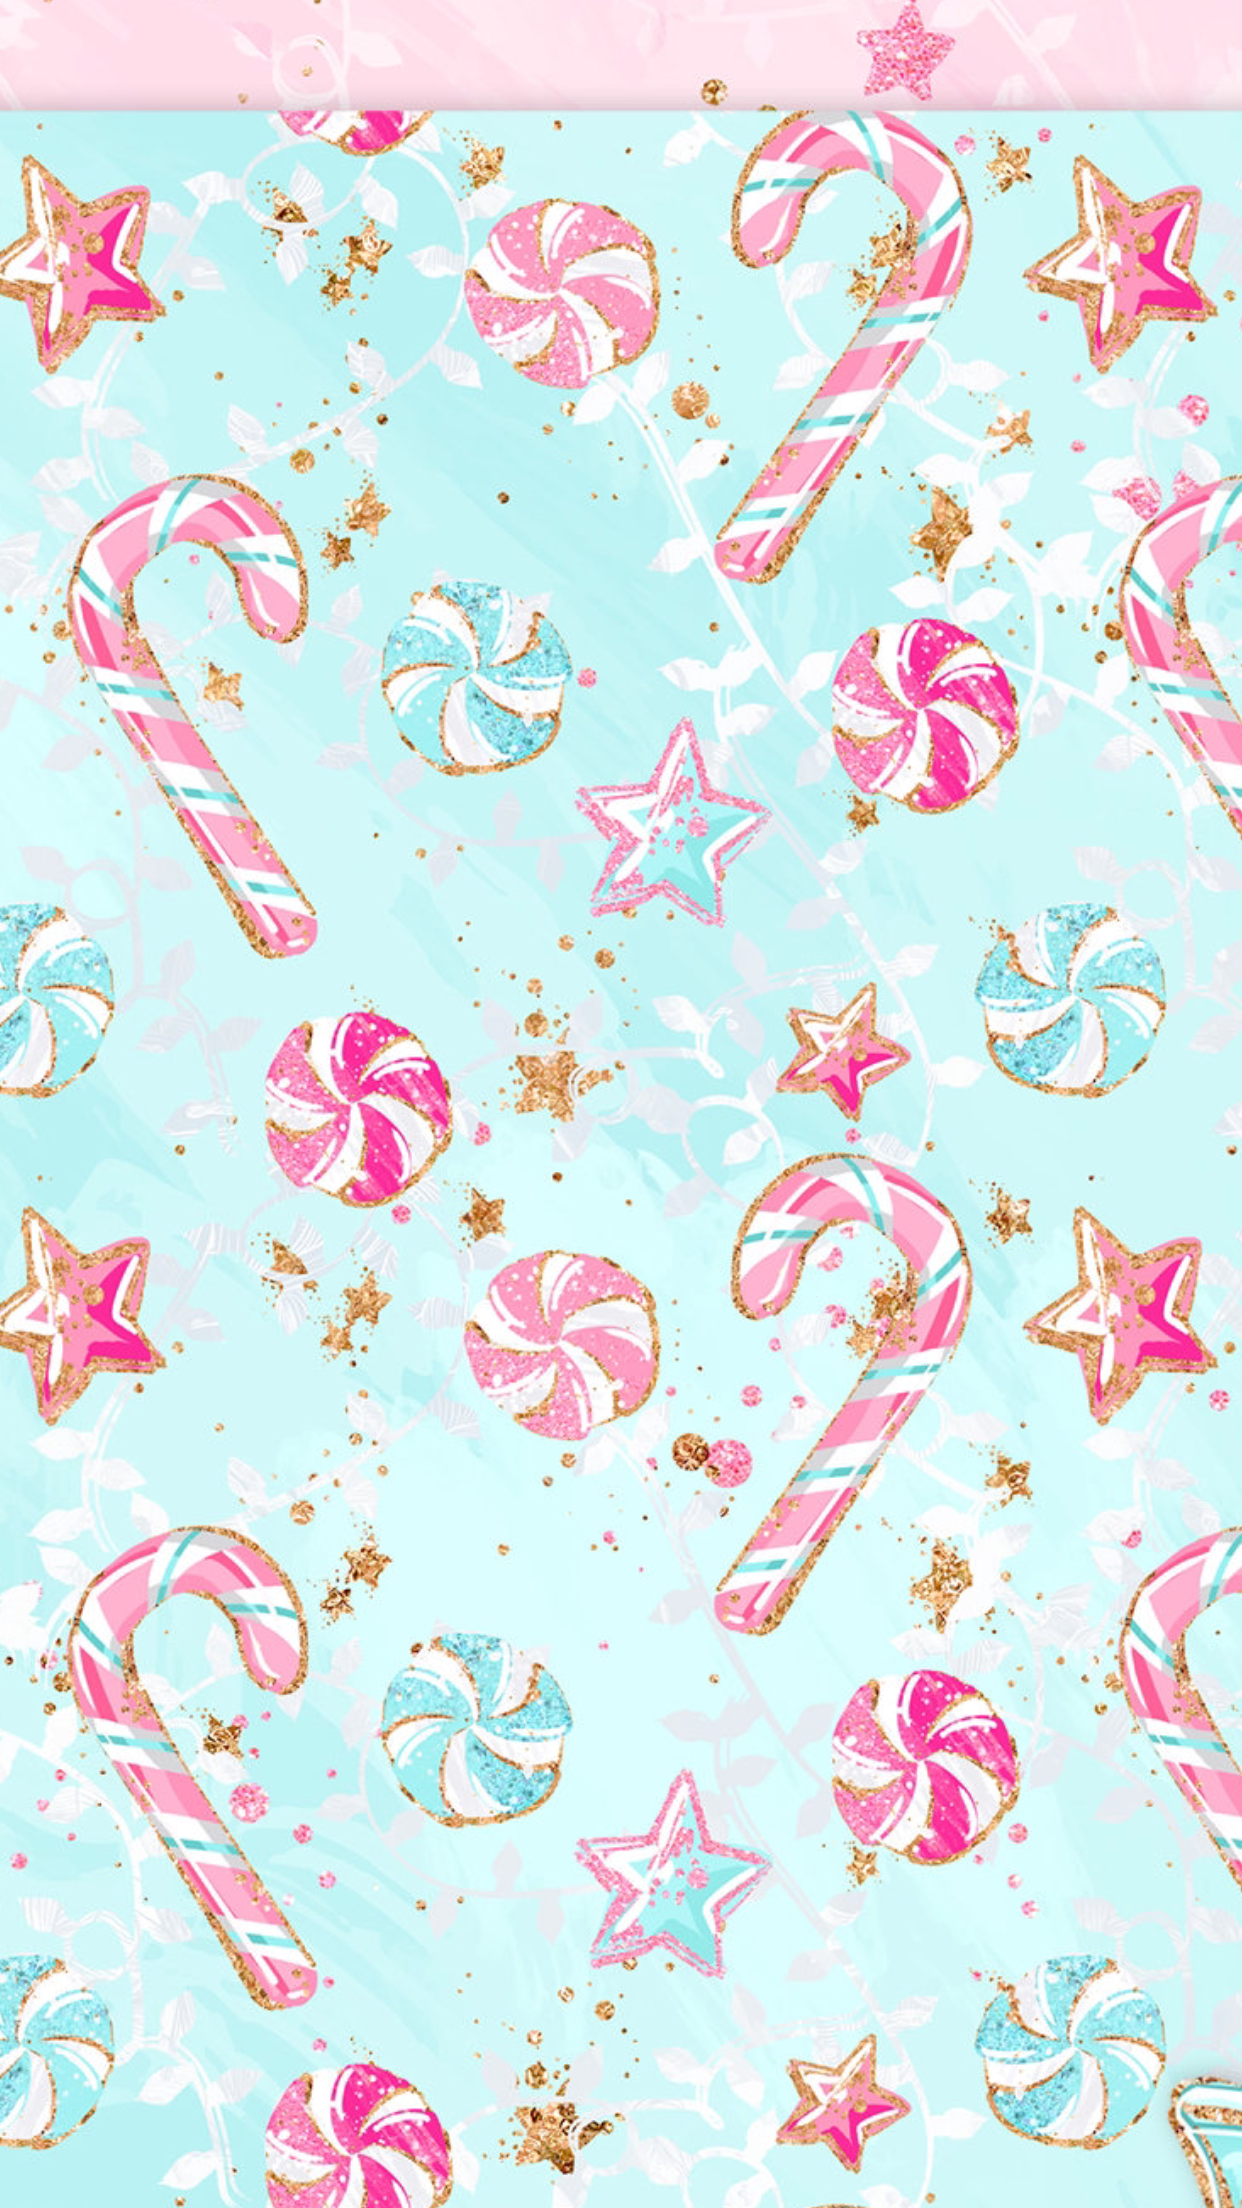 Cute Candy Cane Background - HD Wallpaper 